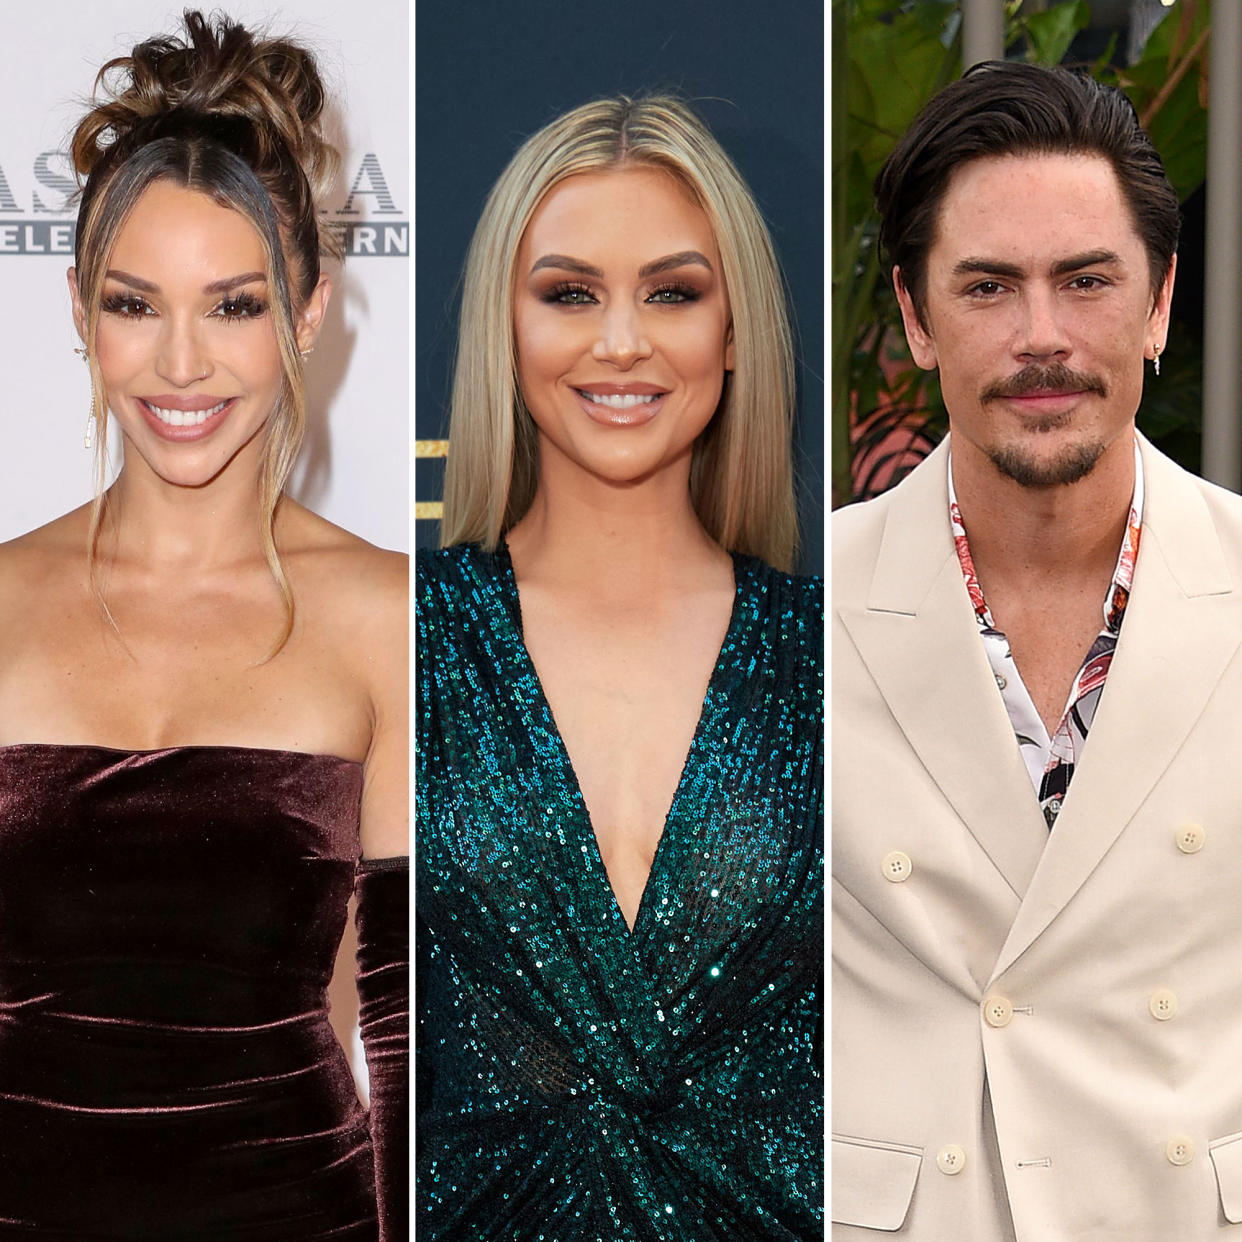 Scheana Shay and Lala Kent Defend Taking a Photo With Tom Sandoval